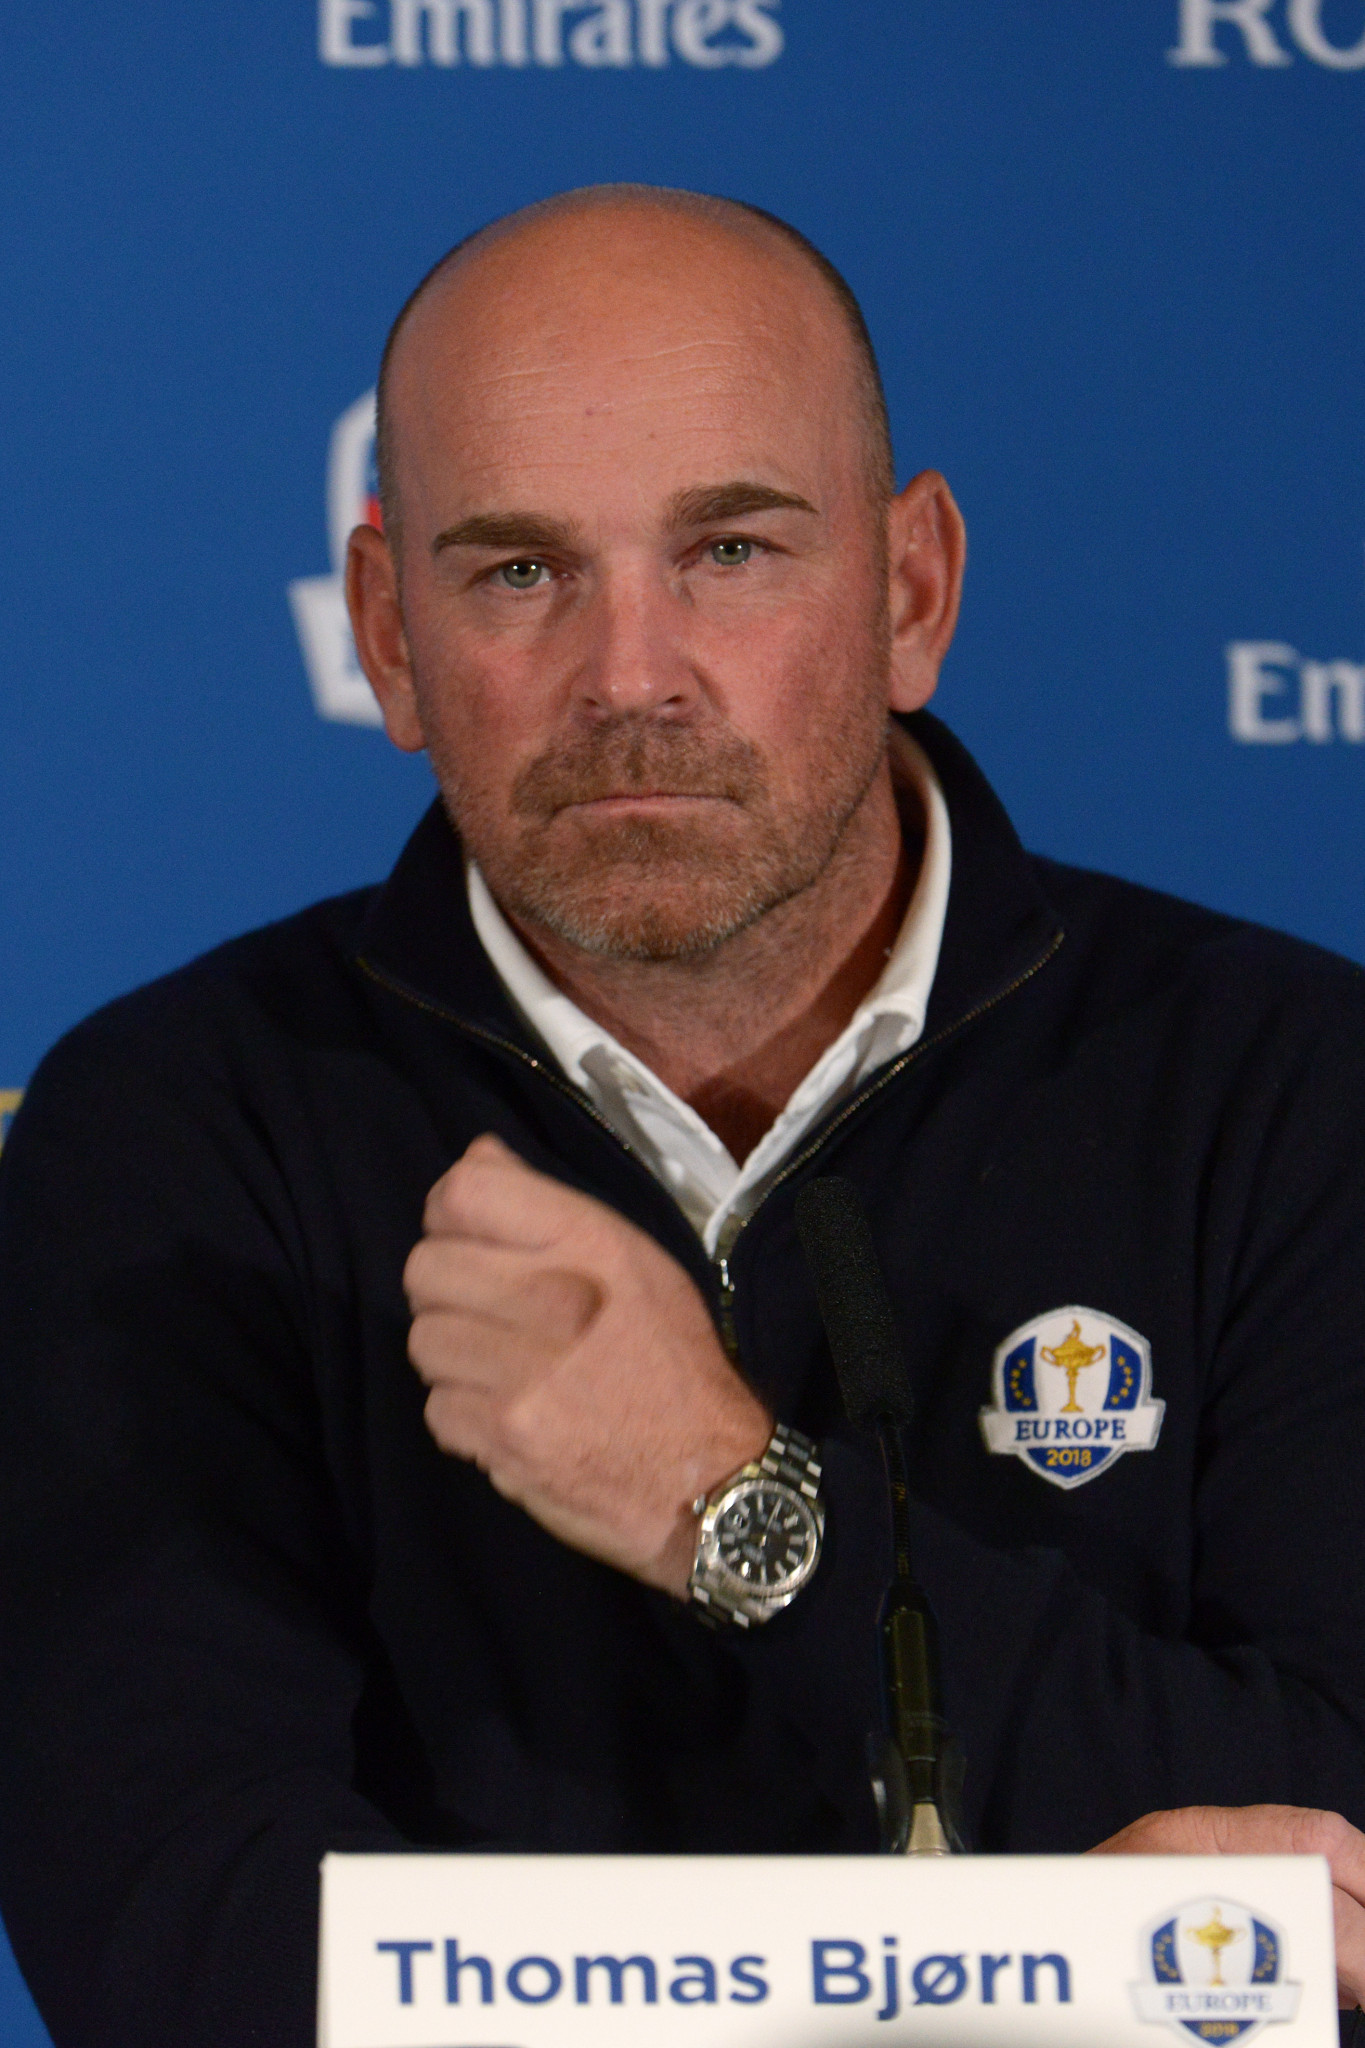 Denmark's Thomas Bjørn, who will captain the Europe team for the 2018 Ryder Cup  ©Getty Images